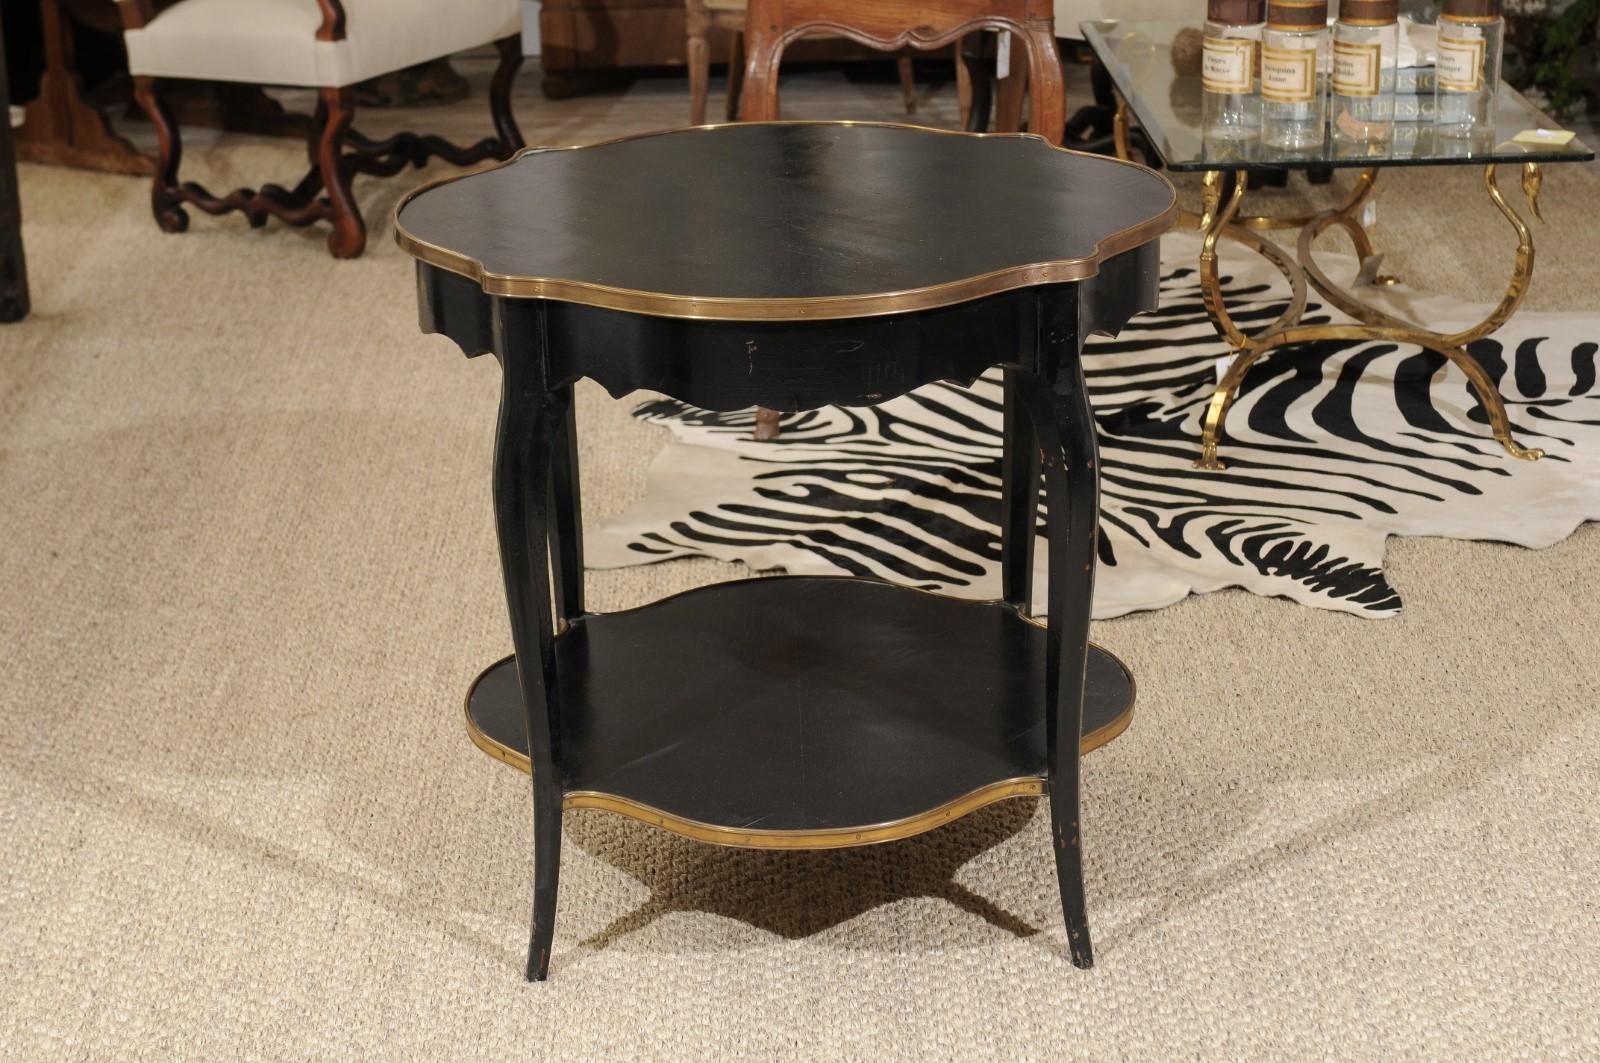 1920s Napoleon III Style Quatrefoil Black-Painted Accent Table with Gilt Accents 1